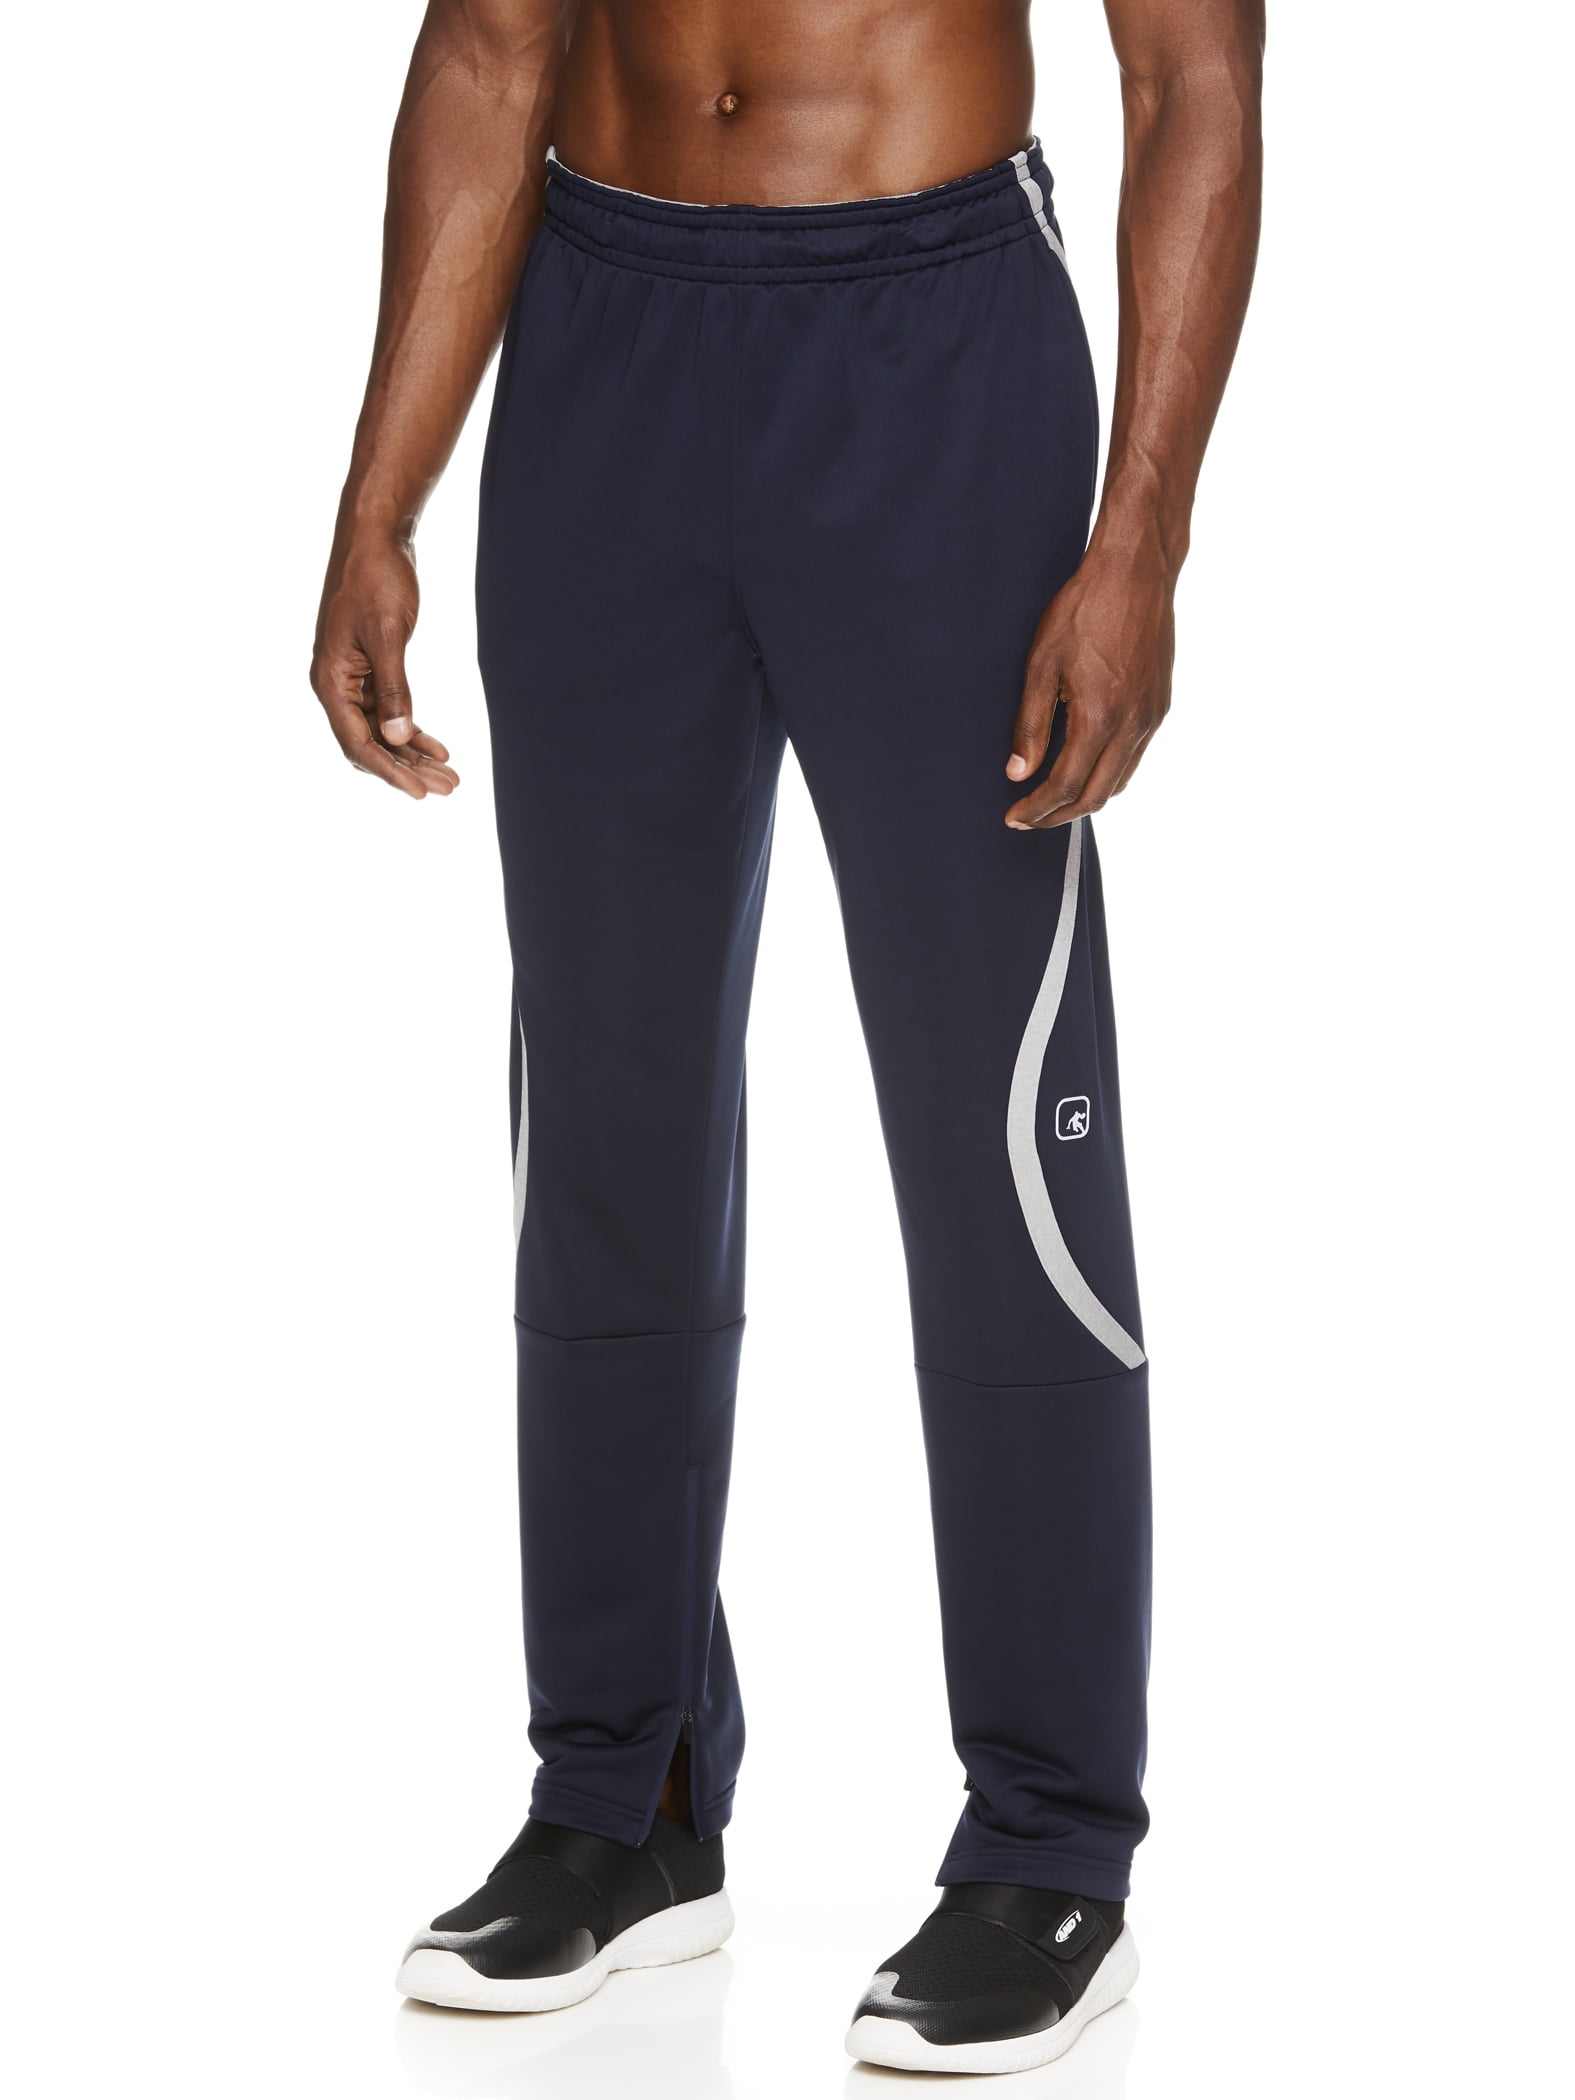 AND1 Men's and Big Men's Performance Track Pant, up to 5XL - Walmart.com